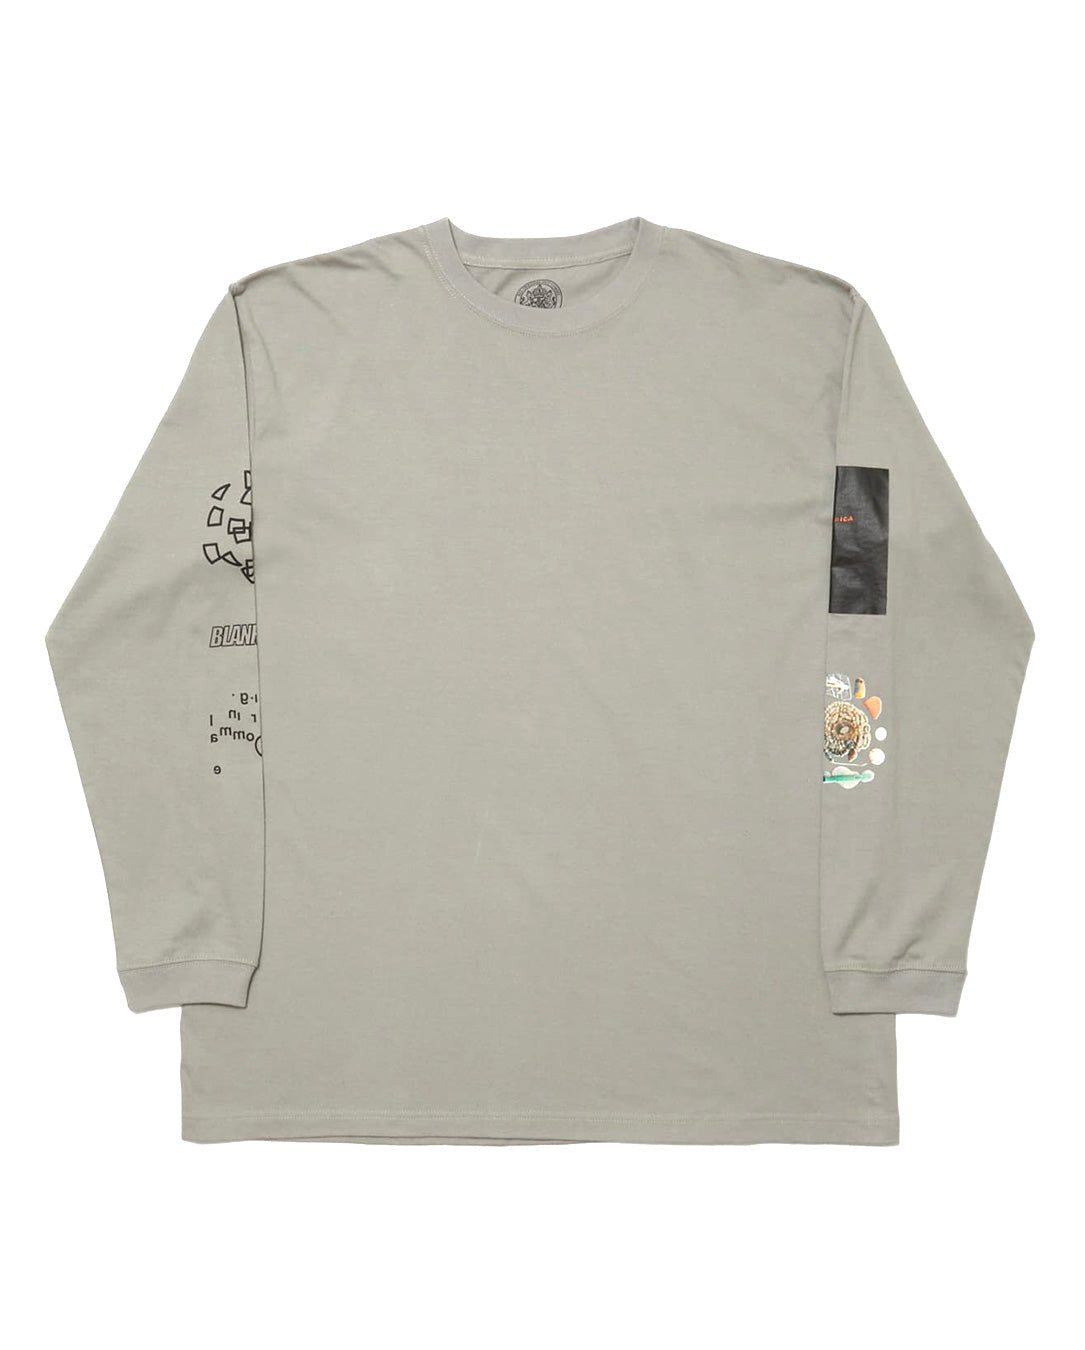 BLANKMAG x Bal  “collection 1” L/S Tee